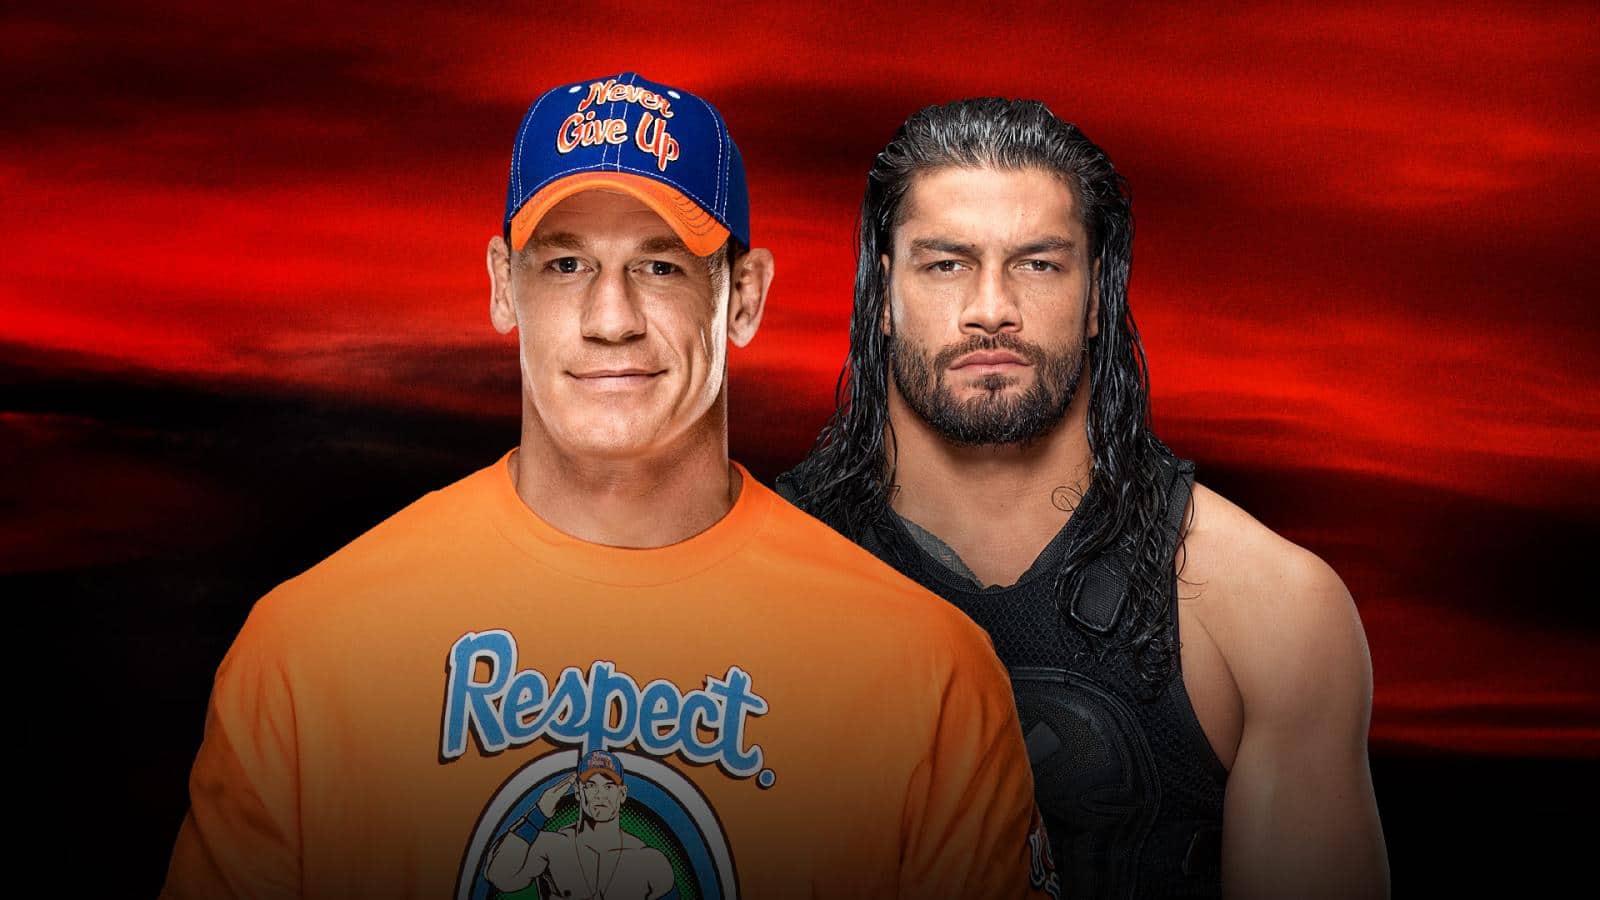 What To Expect - John Cena Vs Roman Reigns No Mercy 2017 , HD Wallpaper & Backgrounds